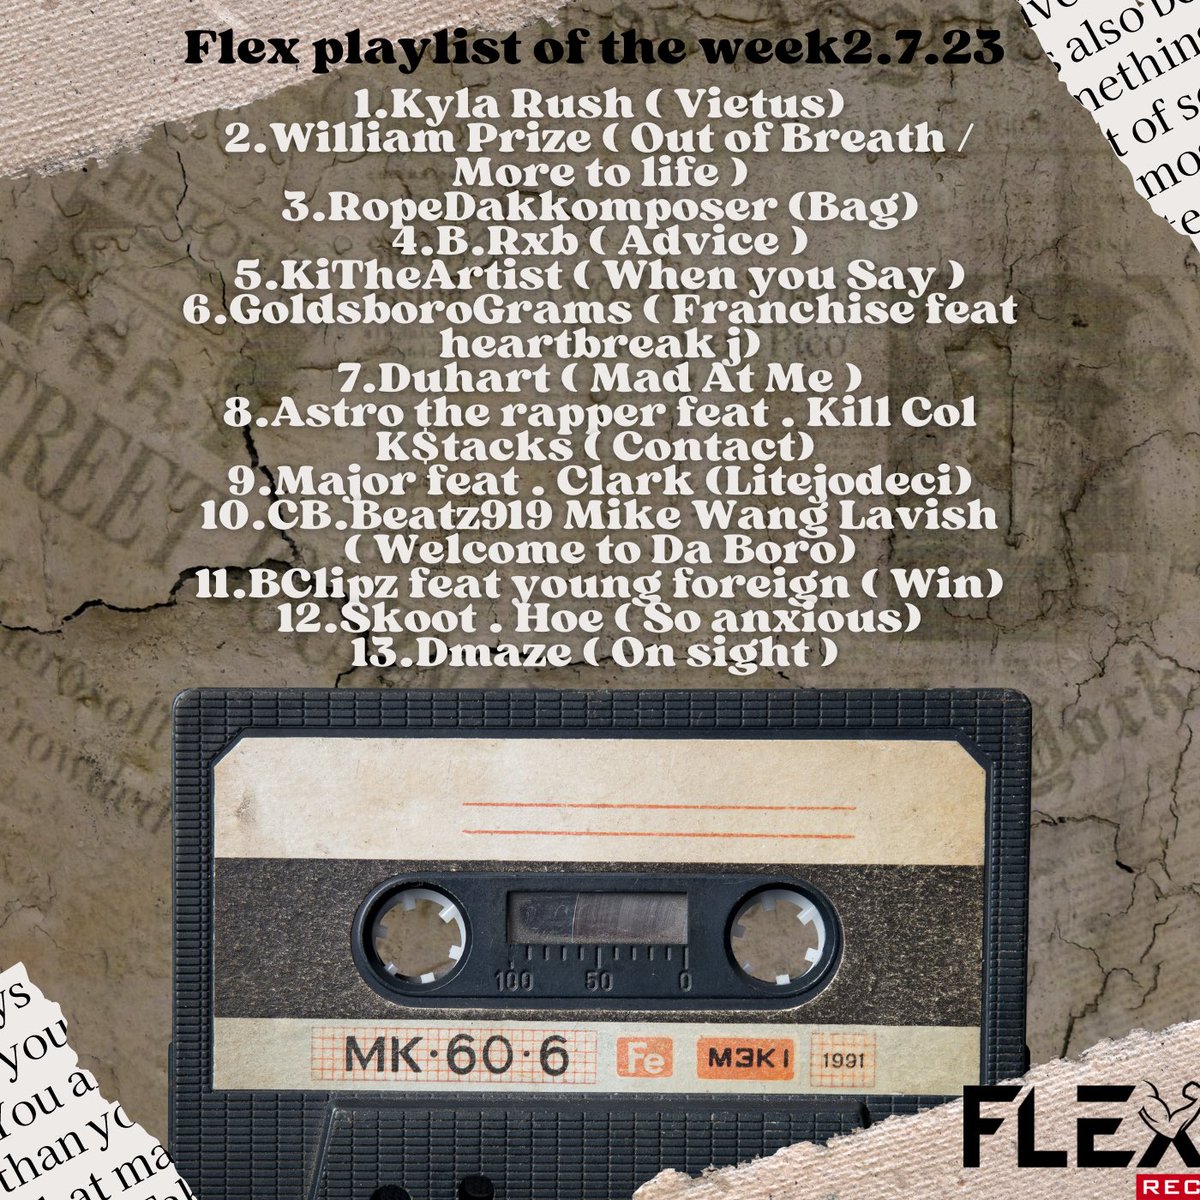 The flex PLAYLIST OF THE WEEK IN OUR BIO NOW 🔥🔥🔥🦾 Tap IN Link in our bio 🦾🦾
.
.

.
.
.
#hiphop #flex #spotify #artist #explore #tidal #deezer #insta #hashtag #drake #vader #47xx #fayettevillenc #maryland #GA #rotationlove #seeyouatthetop #tengreenlights #money #explorepage